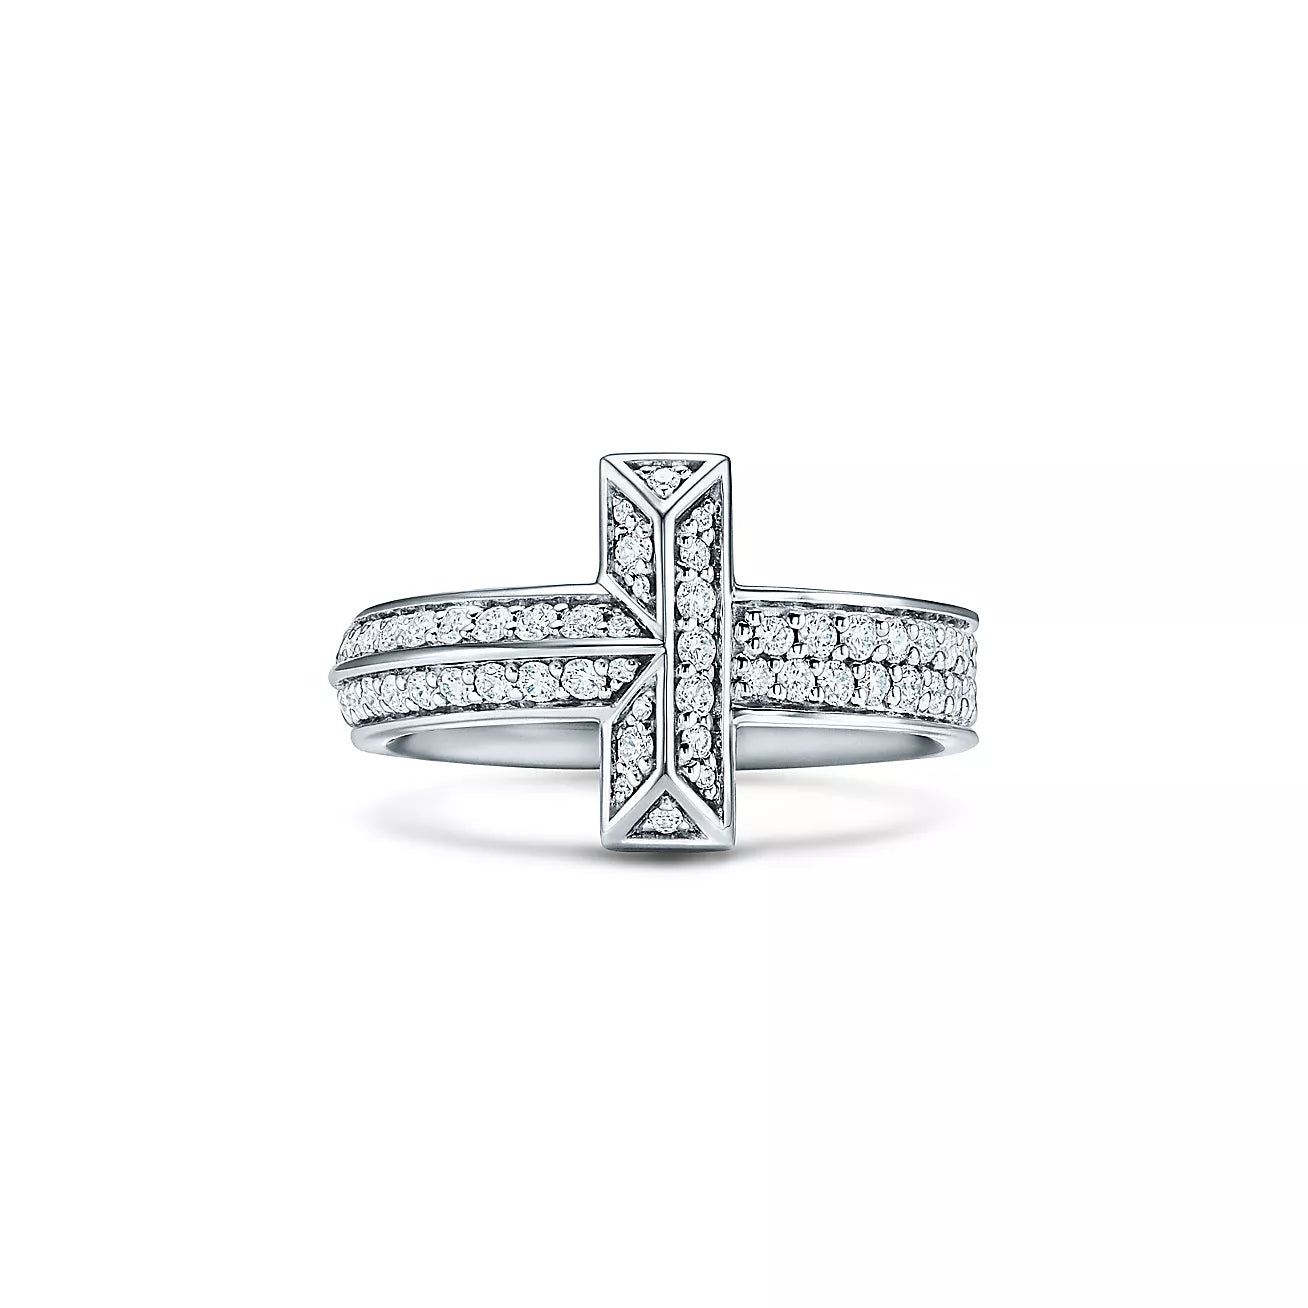 Tiffany T T1 Ring in White Gold with Diamonds, 4.5 mm Wide